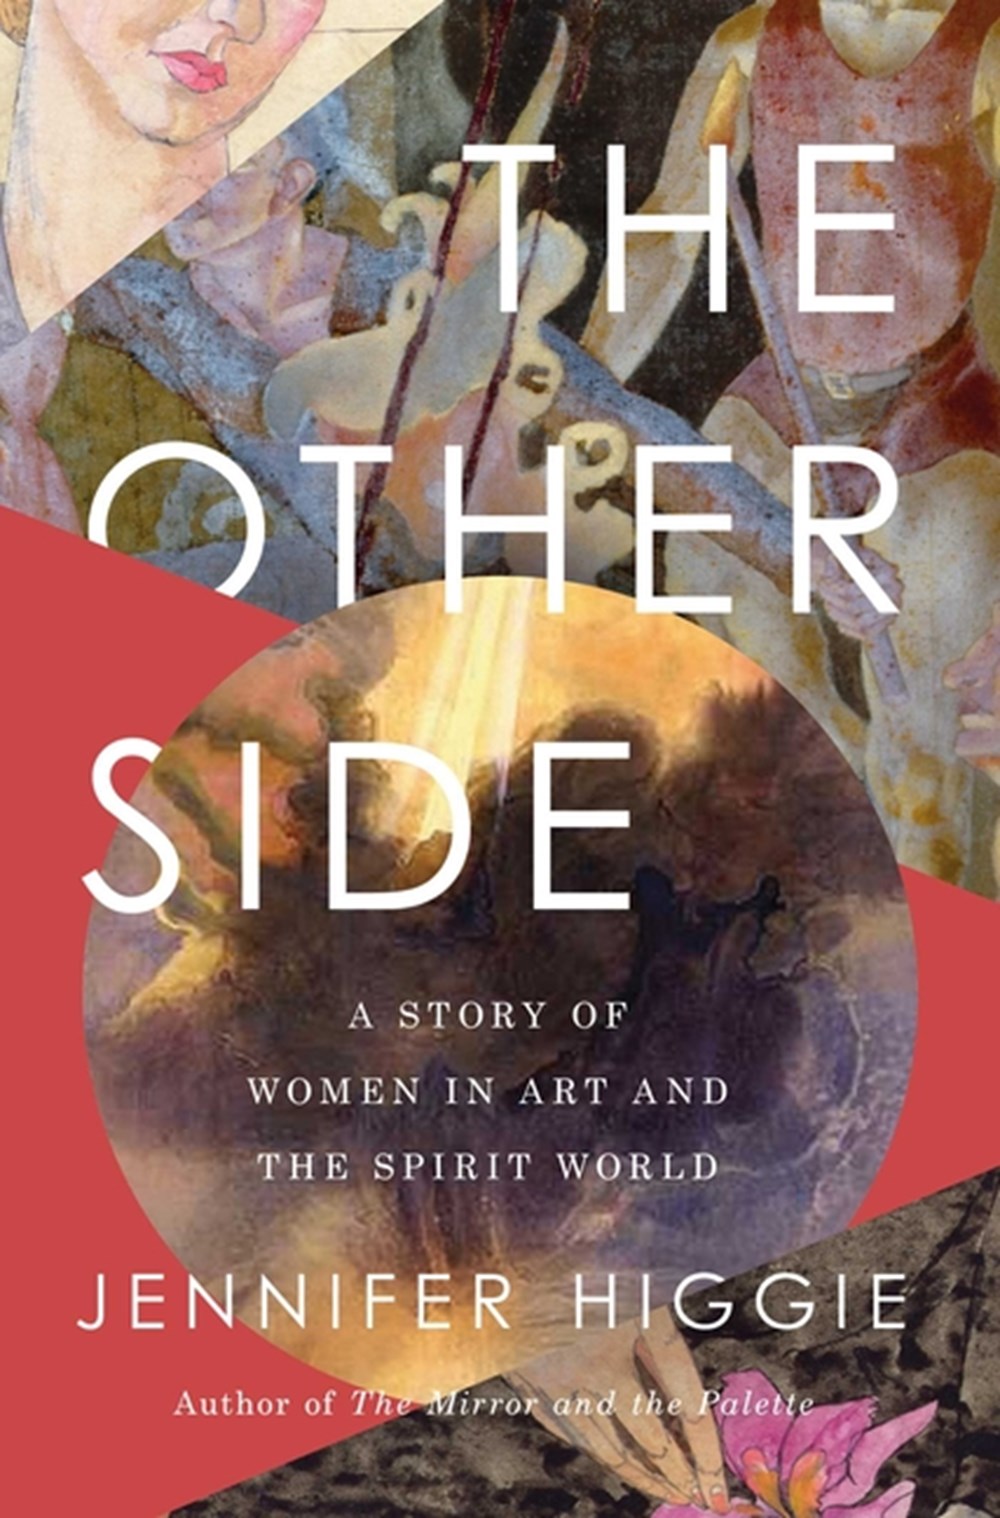 Other Side: A Story of Women in Art and the Spirit World